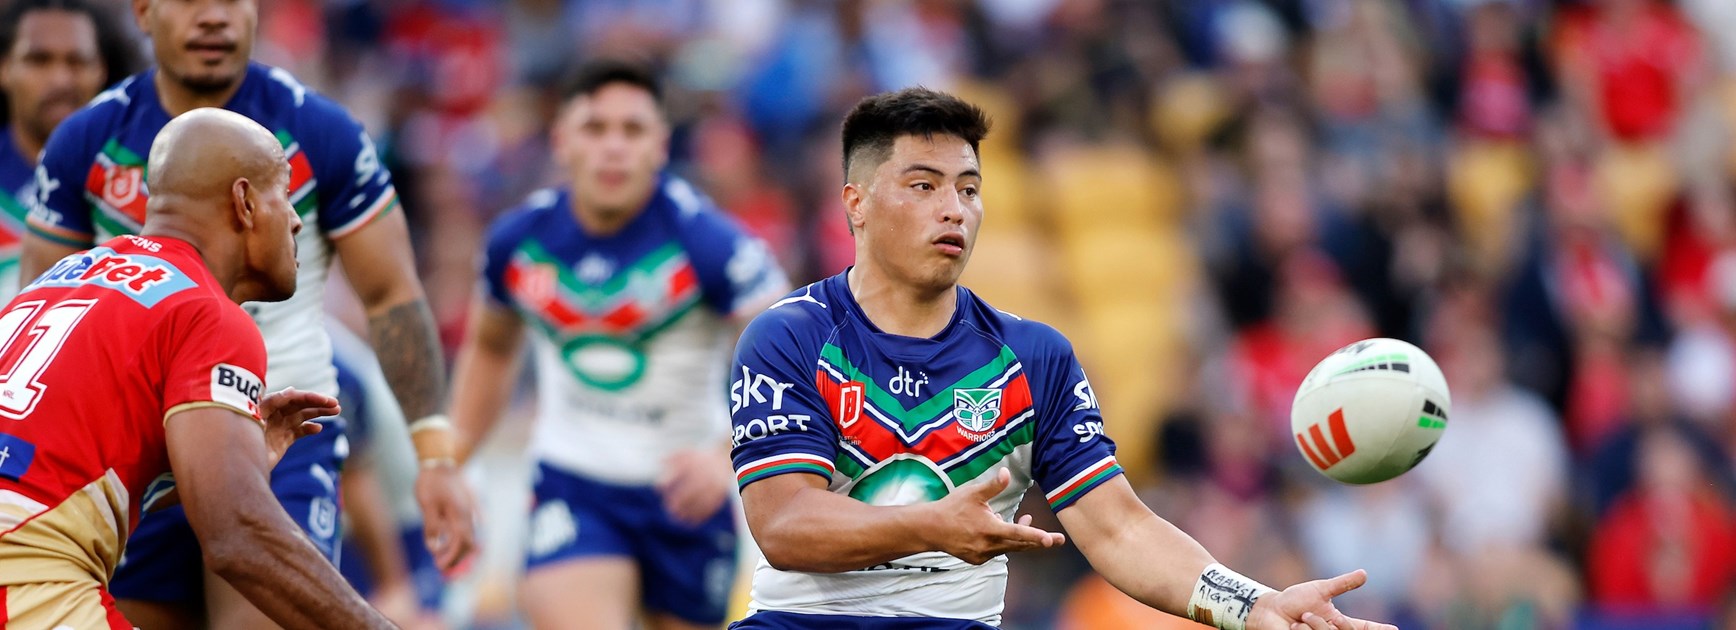 Gallagher Kangaroos v Toa Samoa: Both sides 1-17 with no late changes